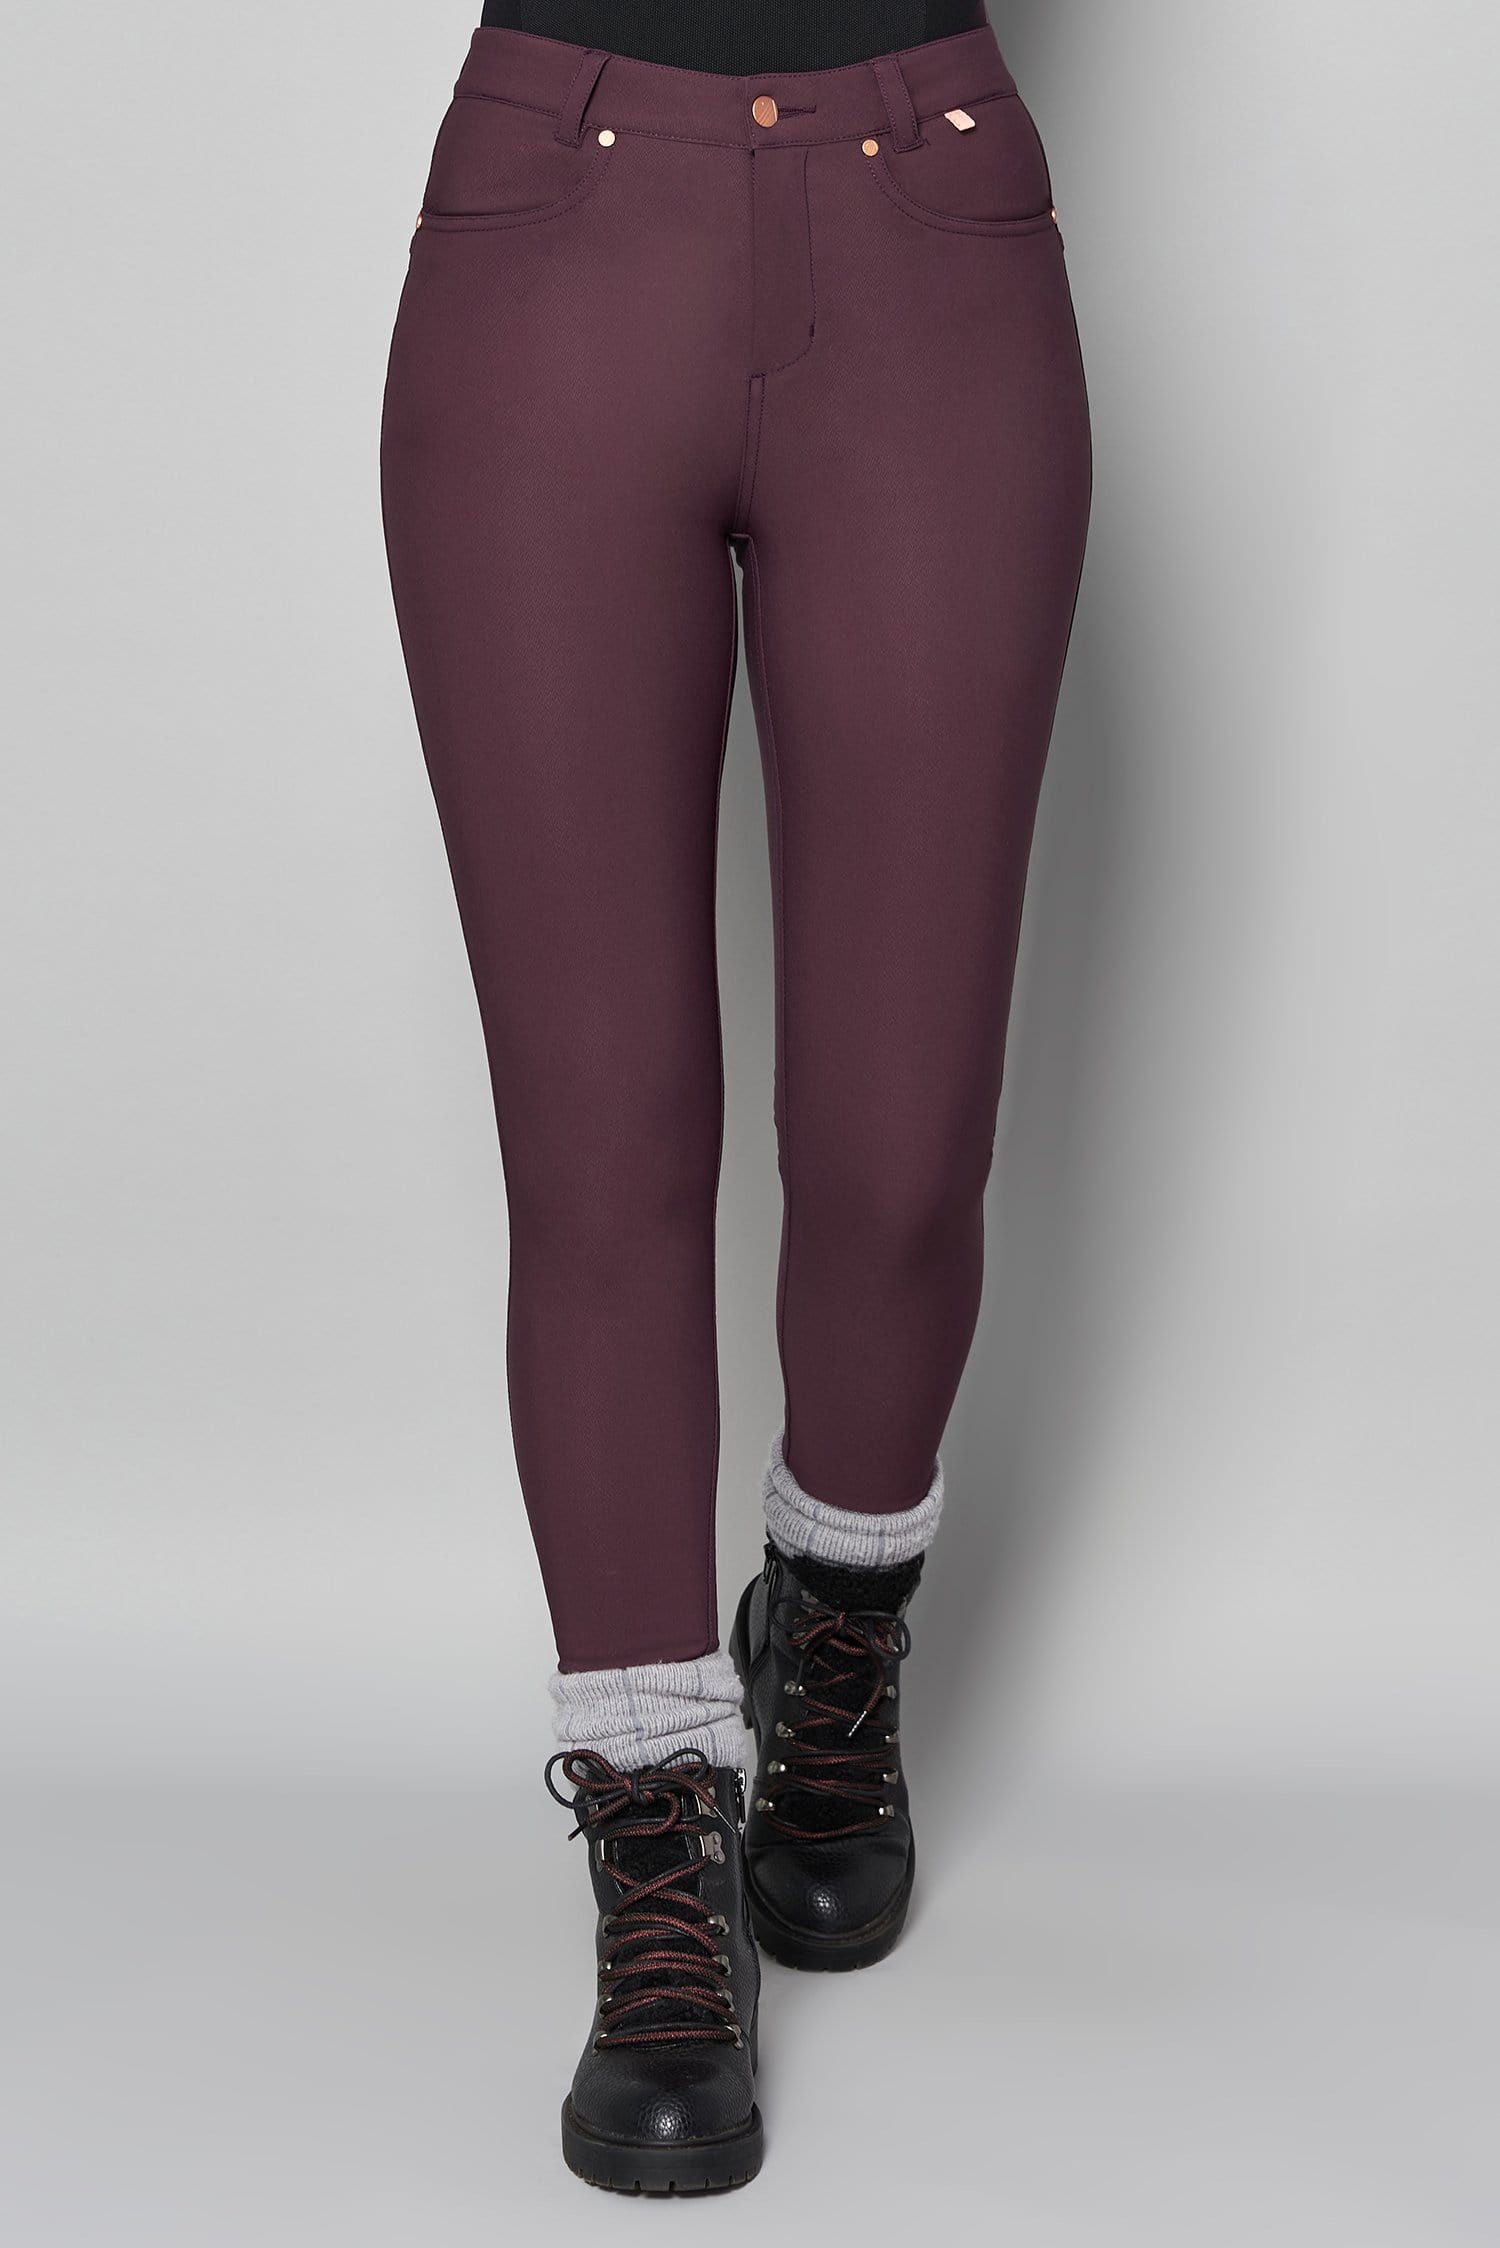 Thermal Skinny Outdoor Trousers - Aubergine - 38r / Uk20 - Womens - Acai Outdoorwear